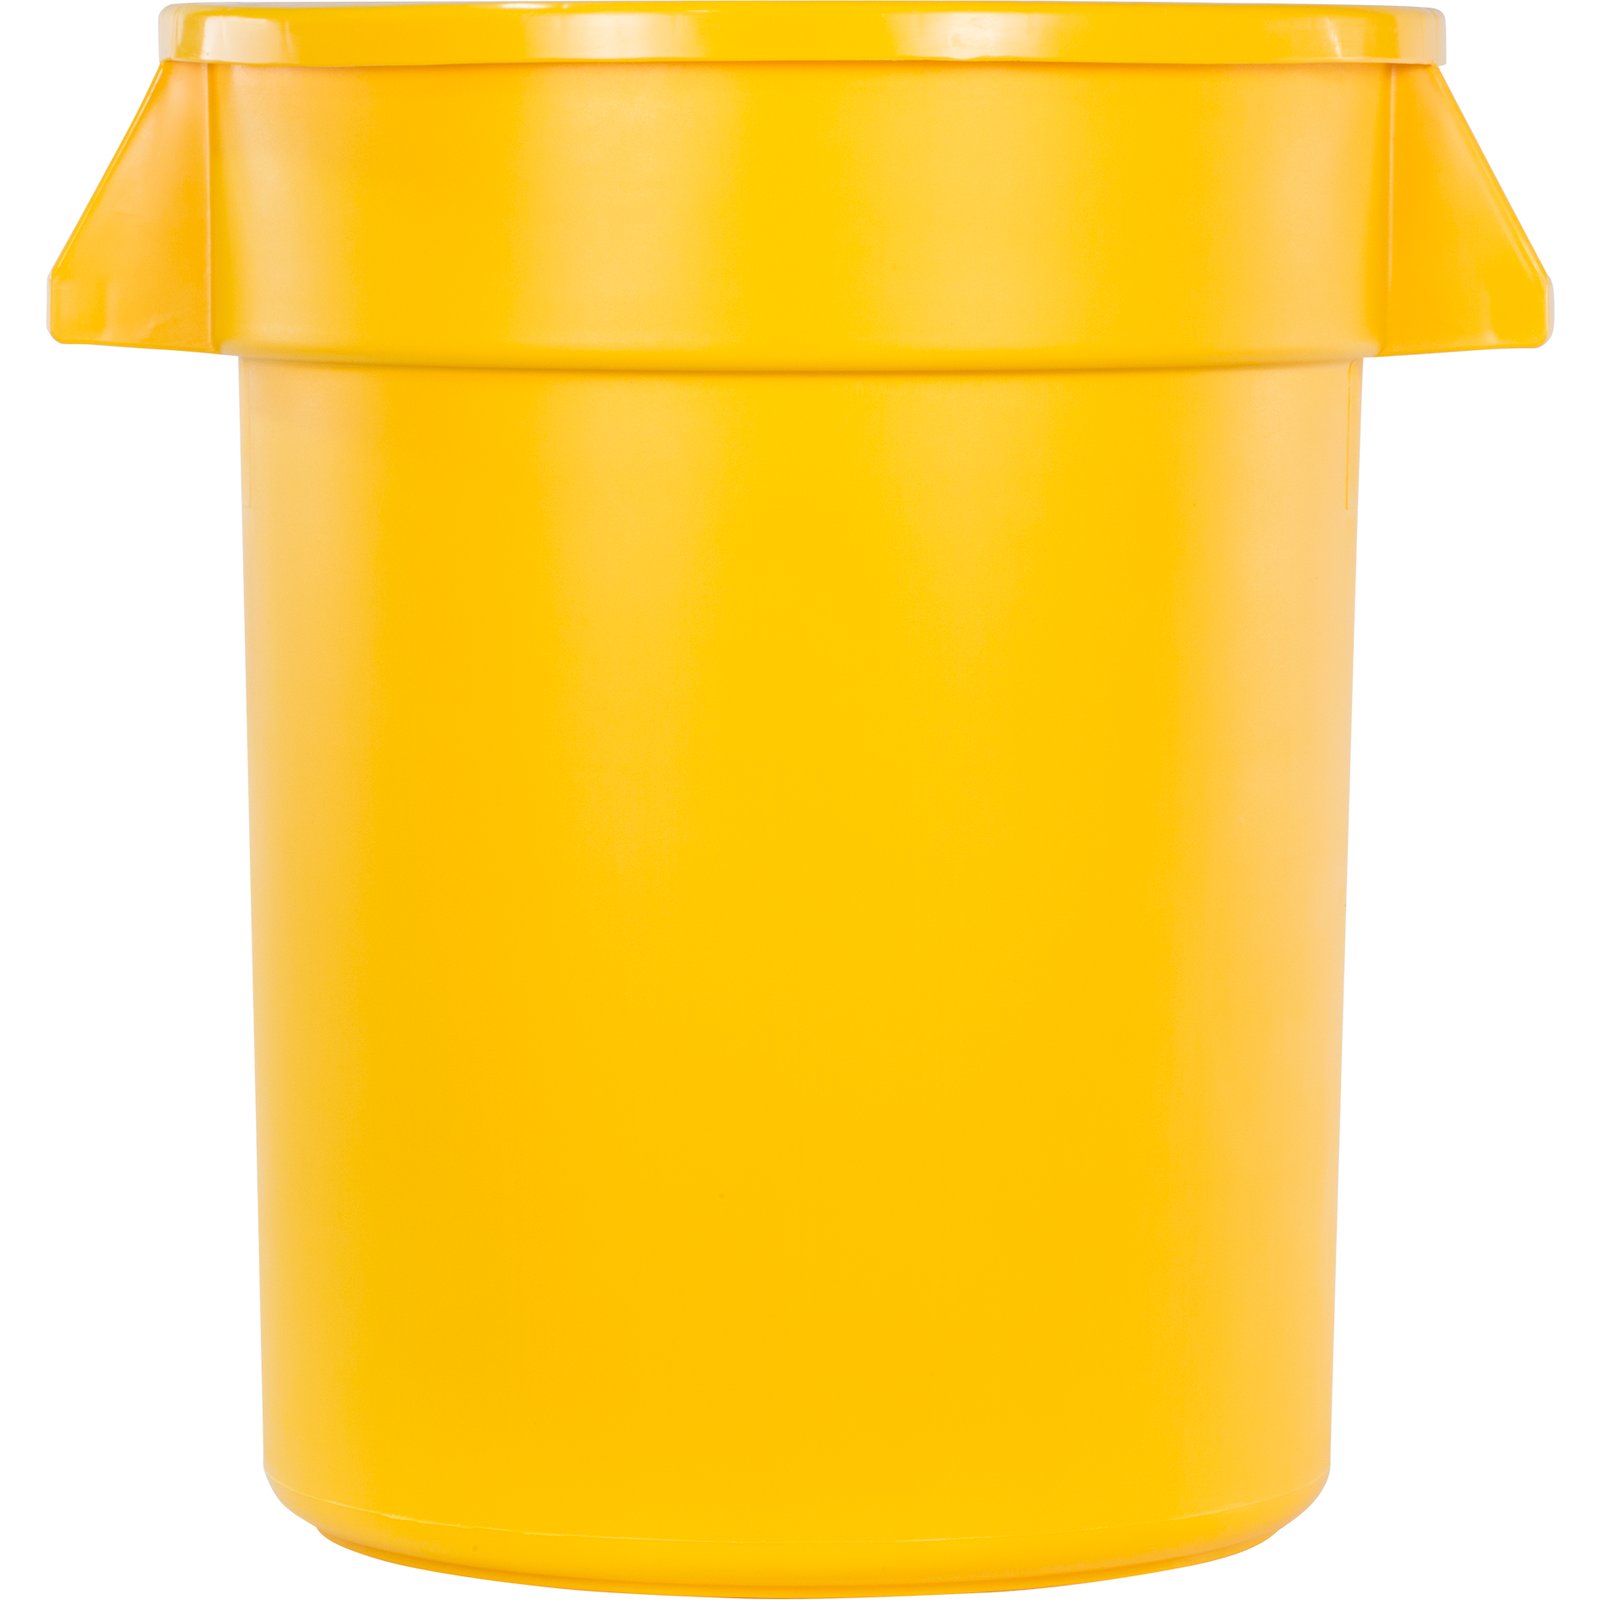 19.88 Diameter x 23 Height 20 Gallon Capacity Carlisle 341020REC14 Bronco LLDPE Recycle Waste Container Blue 